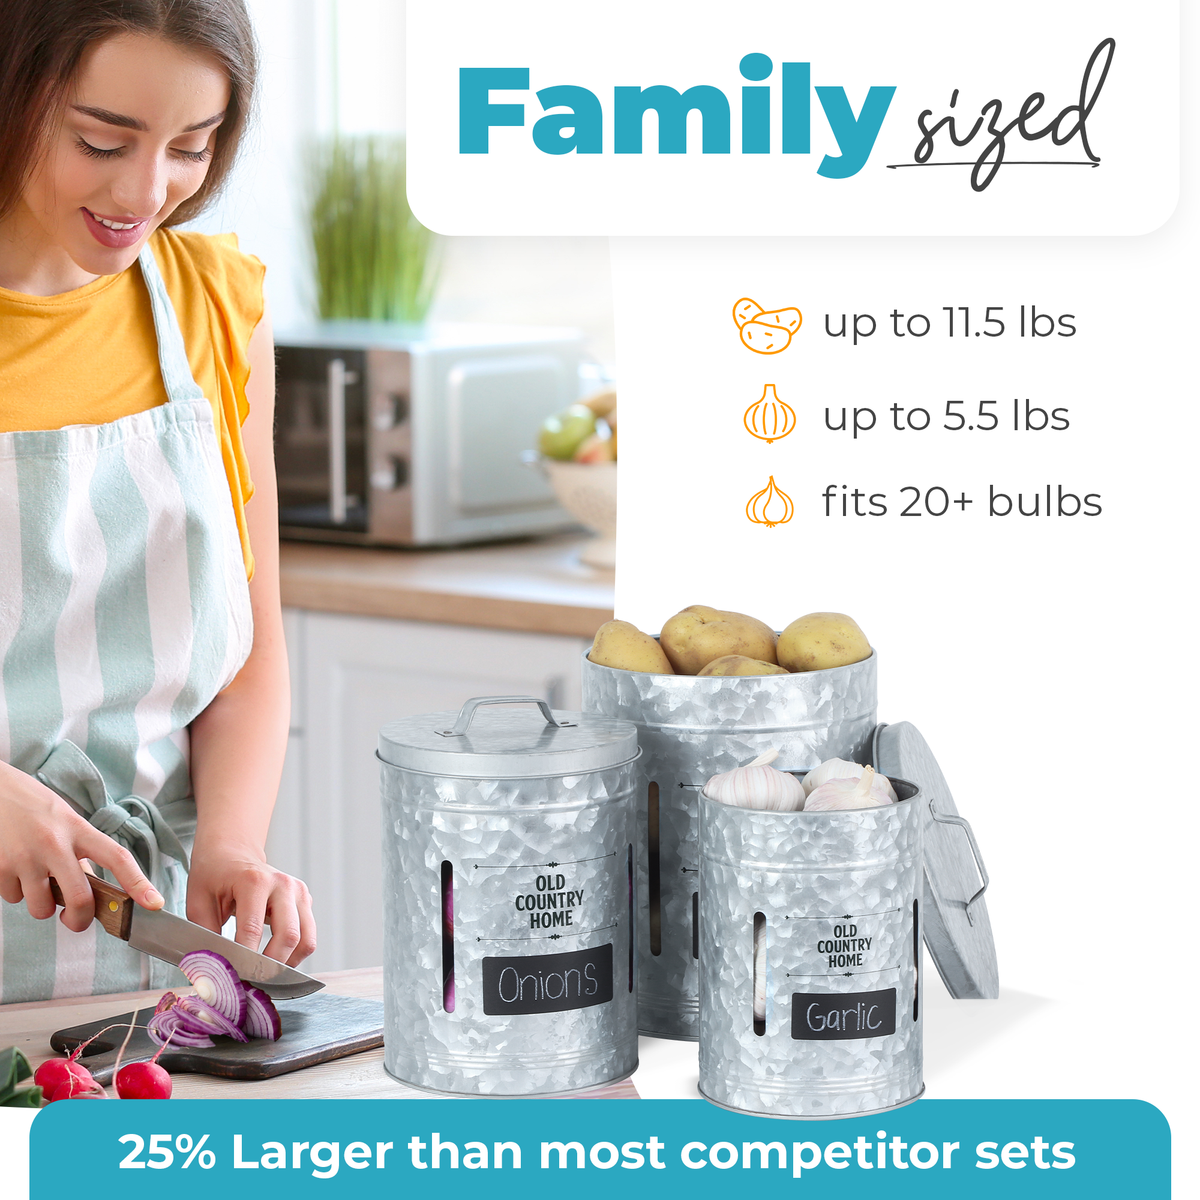 A family sized veggie canister which is 25% larger than most competitor sets